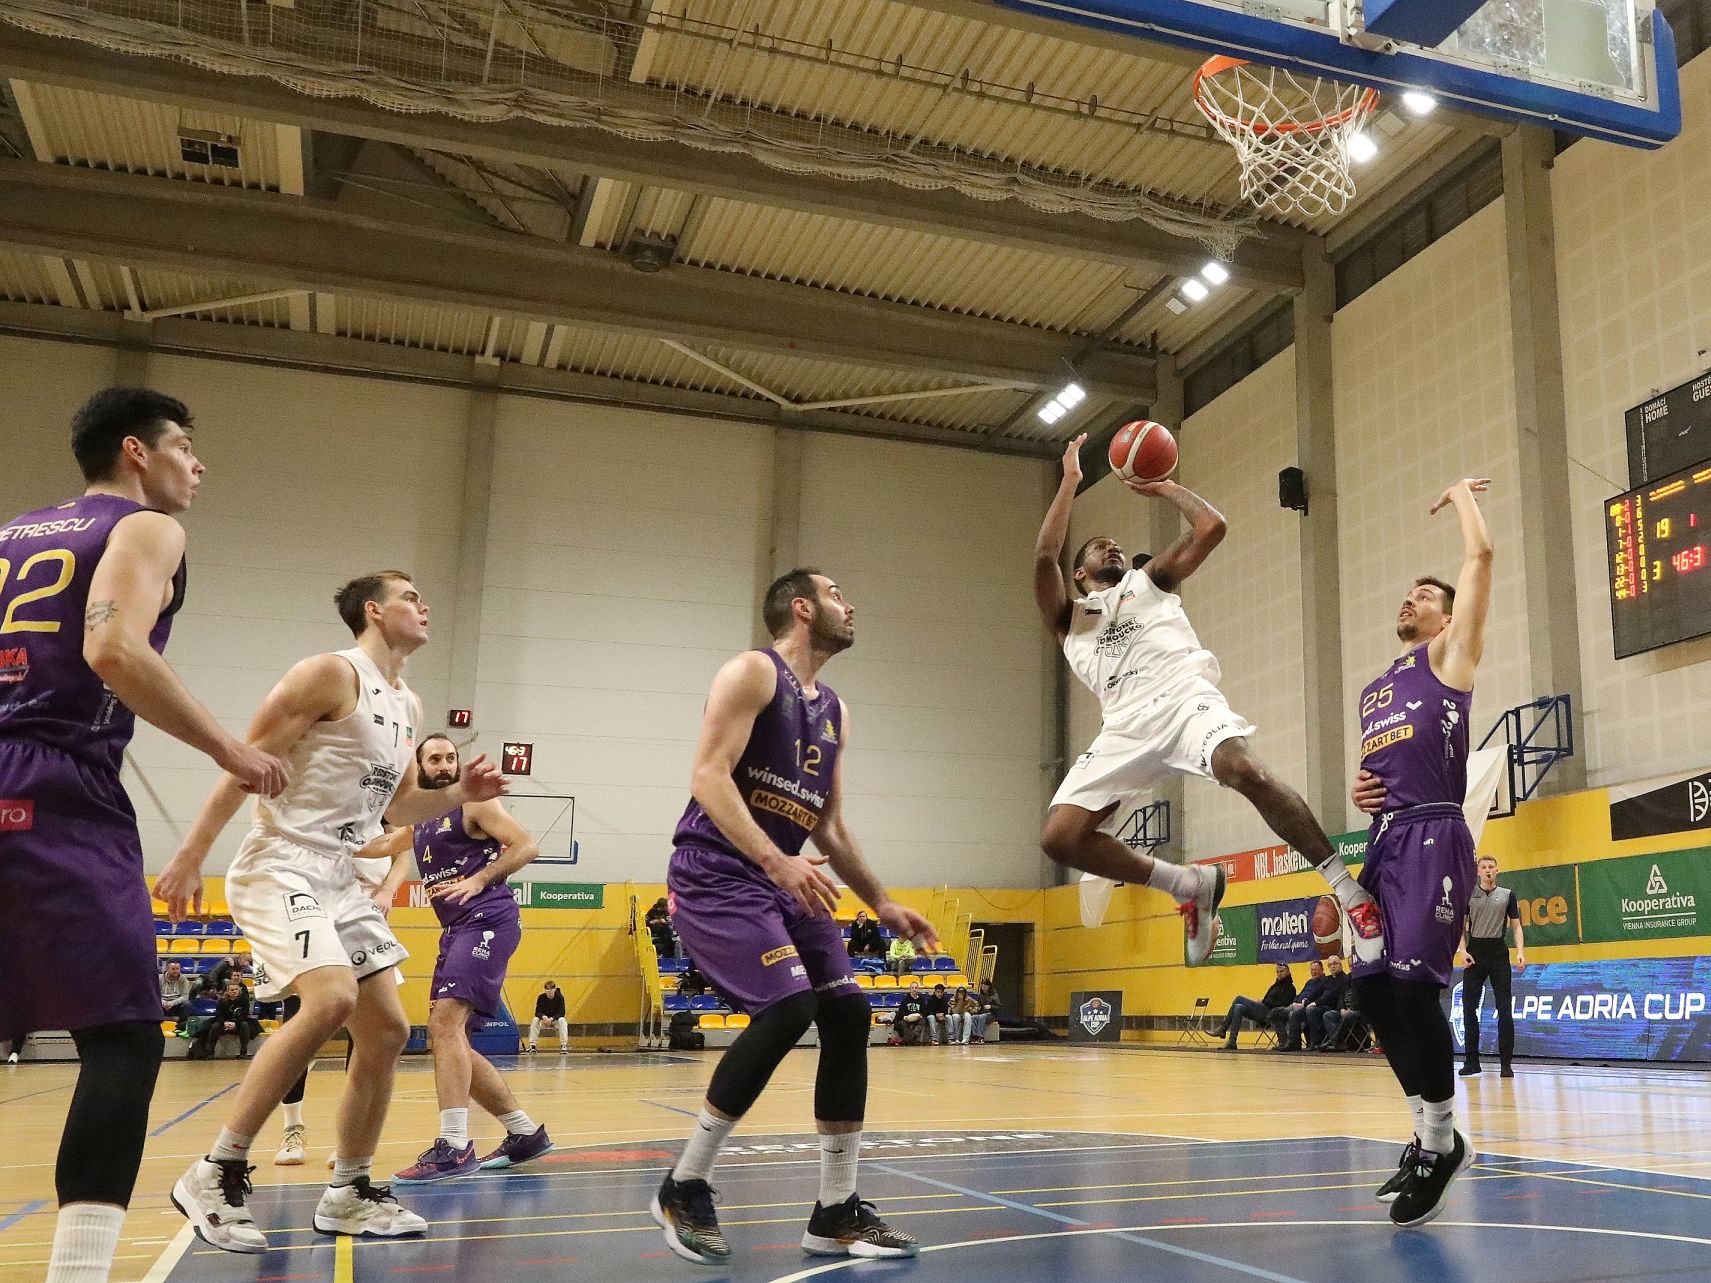 Timisoara is getting closer to the Final Four